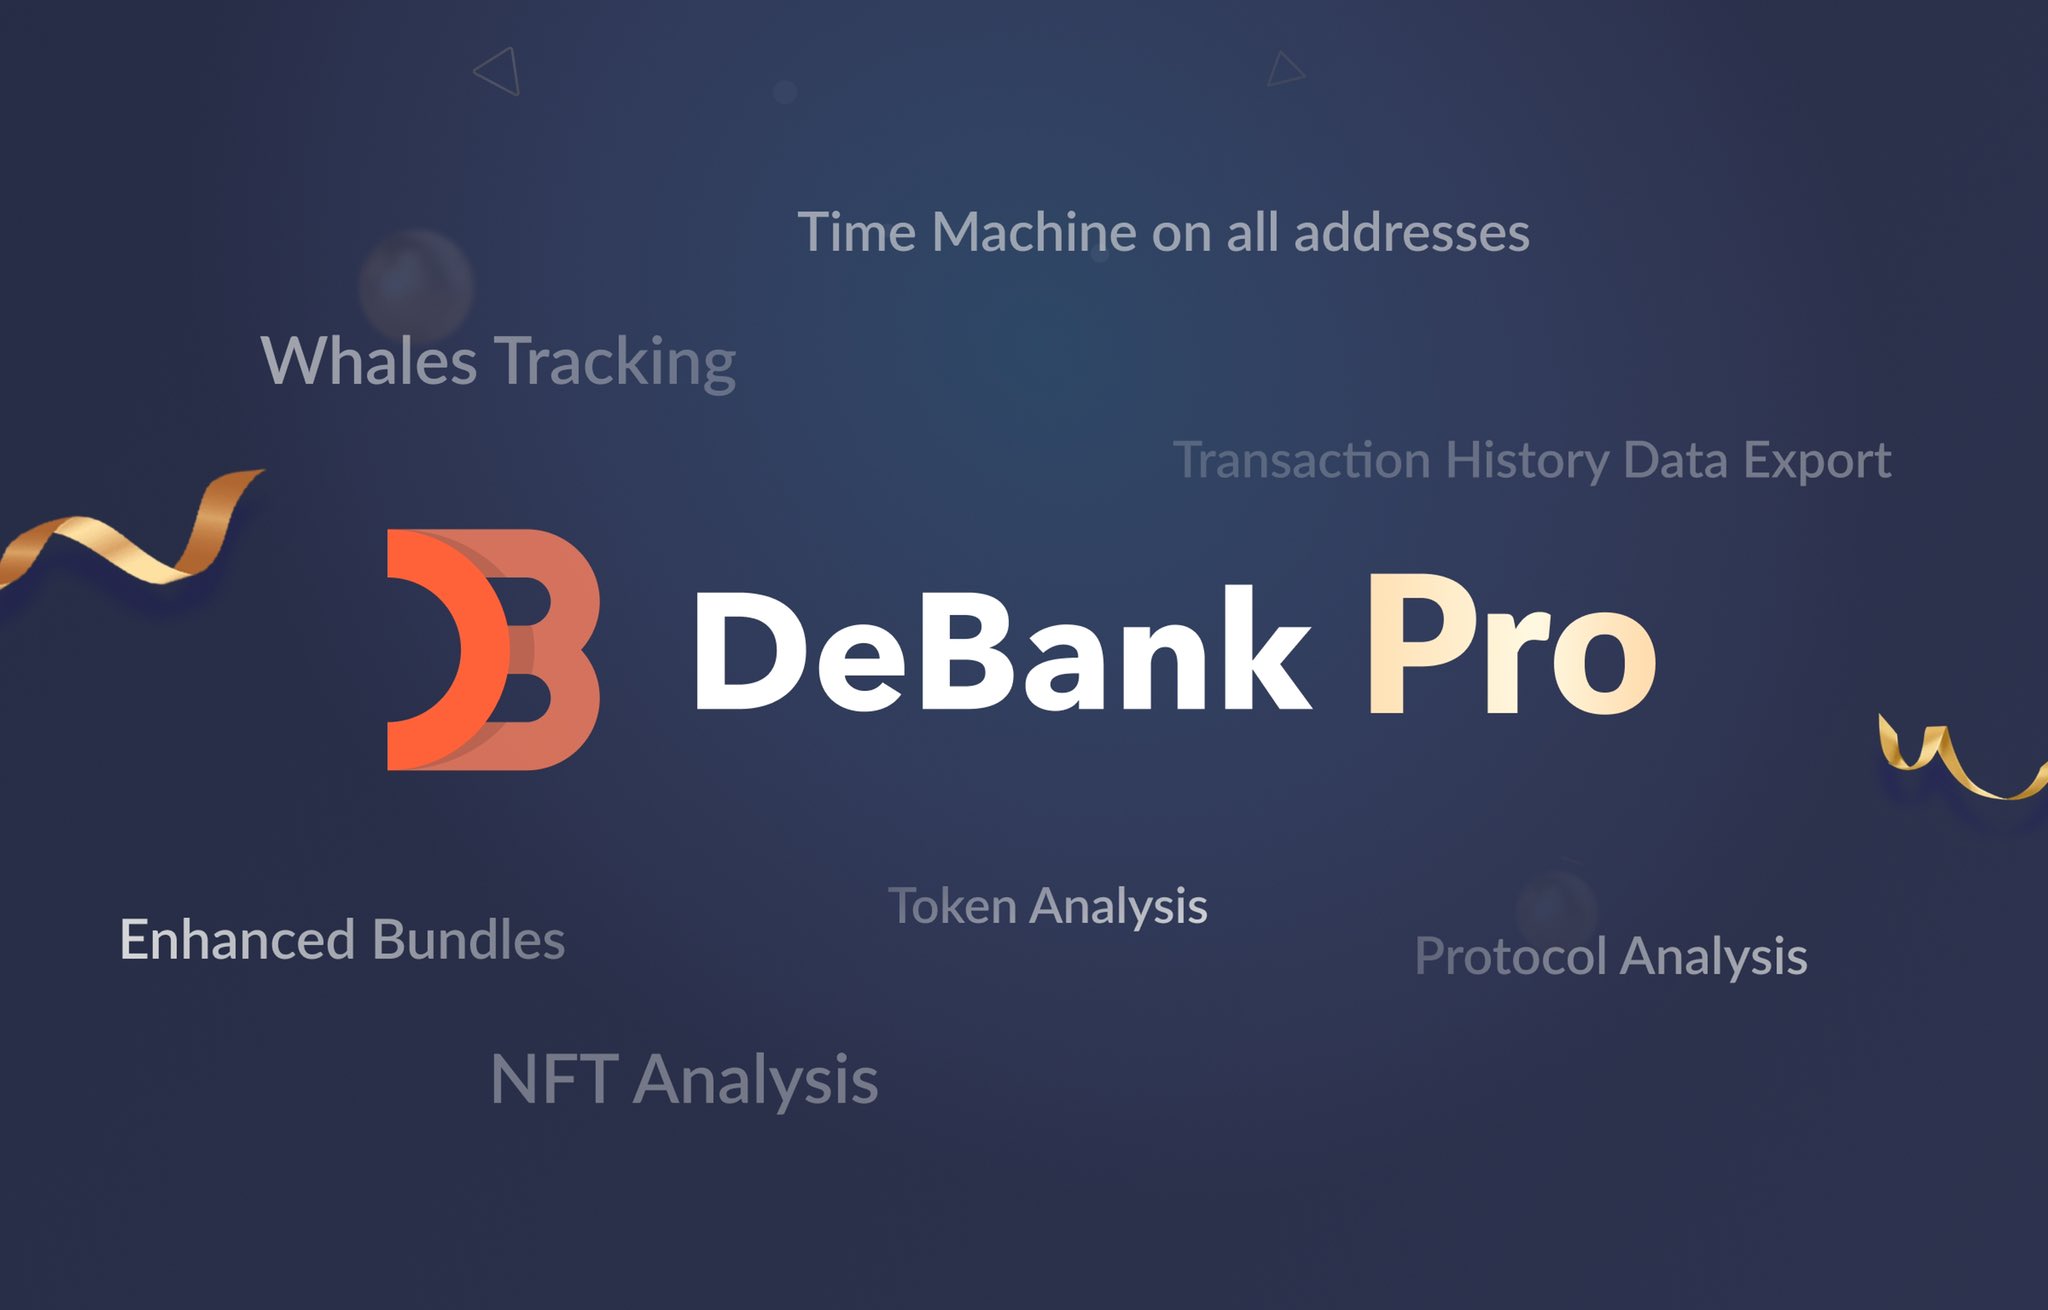 DeBank on X: "1/5 We're really excited to introduce our "DeBank Pro" today! It's a subscription based on-chain data analysis/tracking service built on DeBank's profound data accumulation. https://t.co/5AeR3lecXT" / X